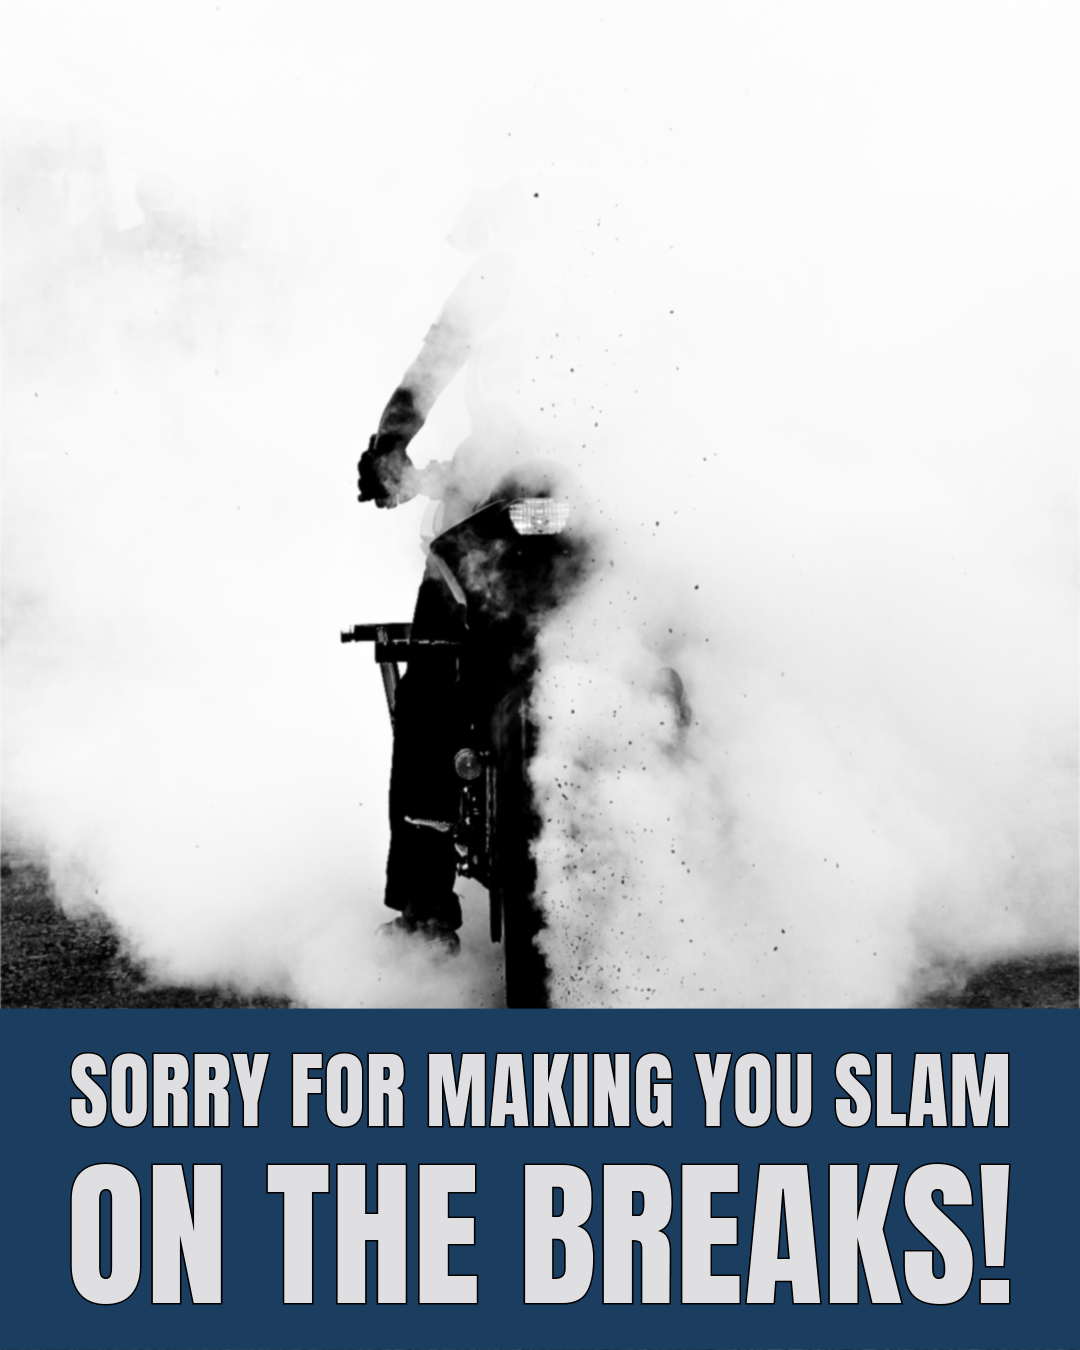 A biker slamming on his breaks, causing not just smoke, but he is now entirely engulfed in the smoke. We are sorry for making you slam on the breaks!